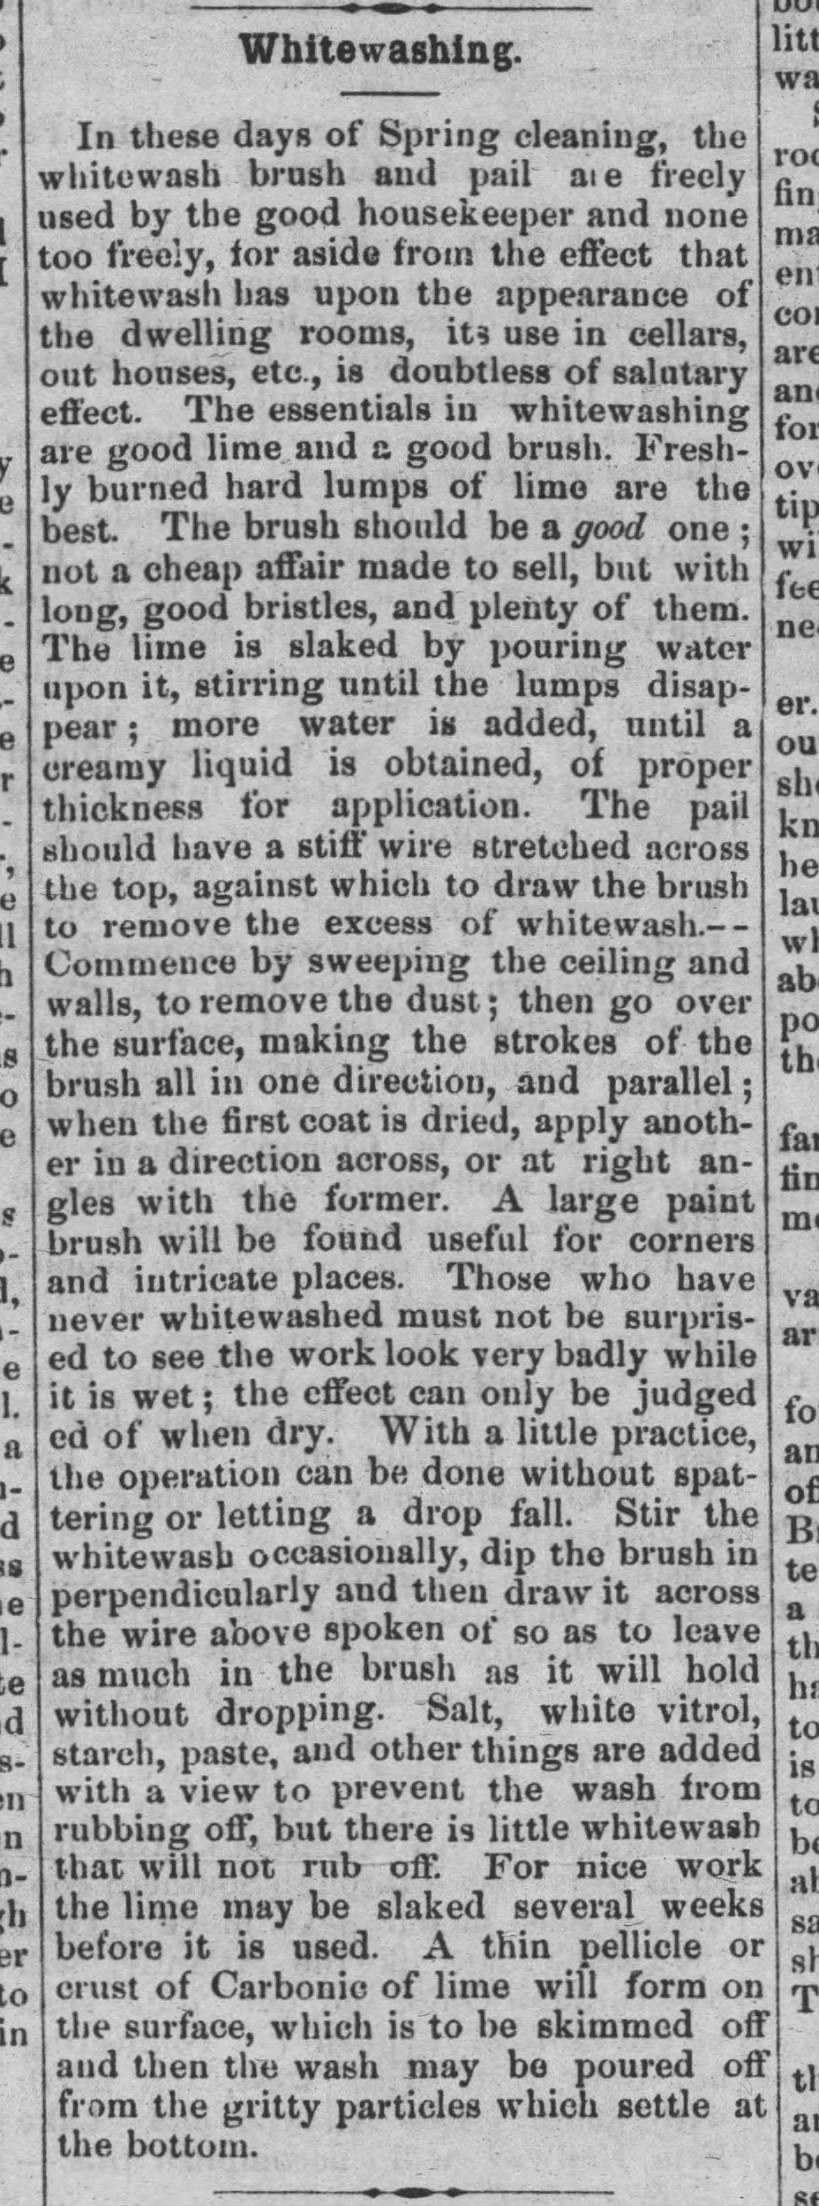 How to make and use whitewash, 1869